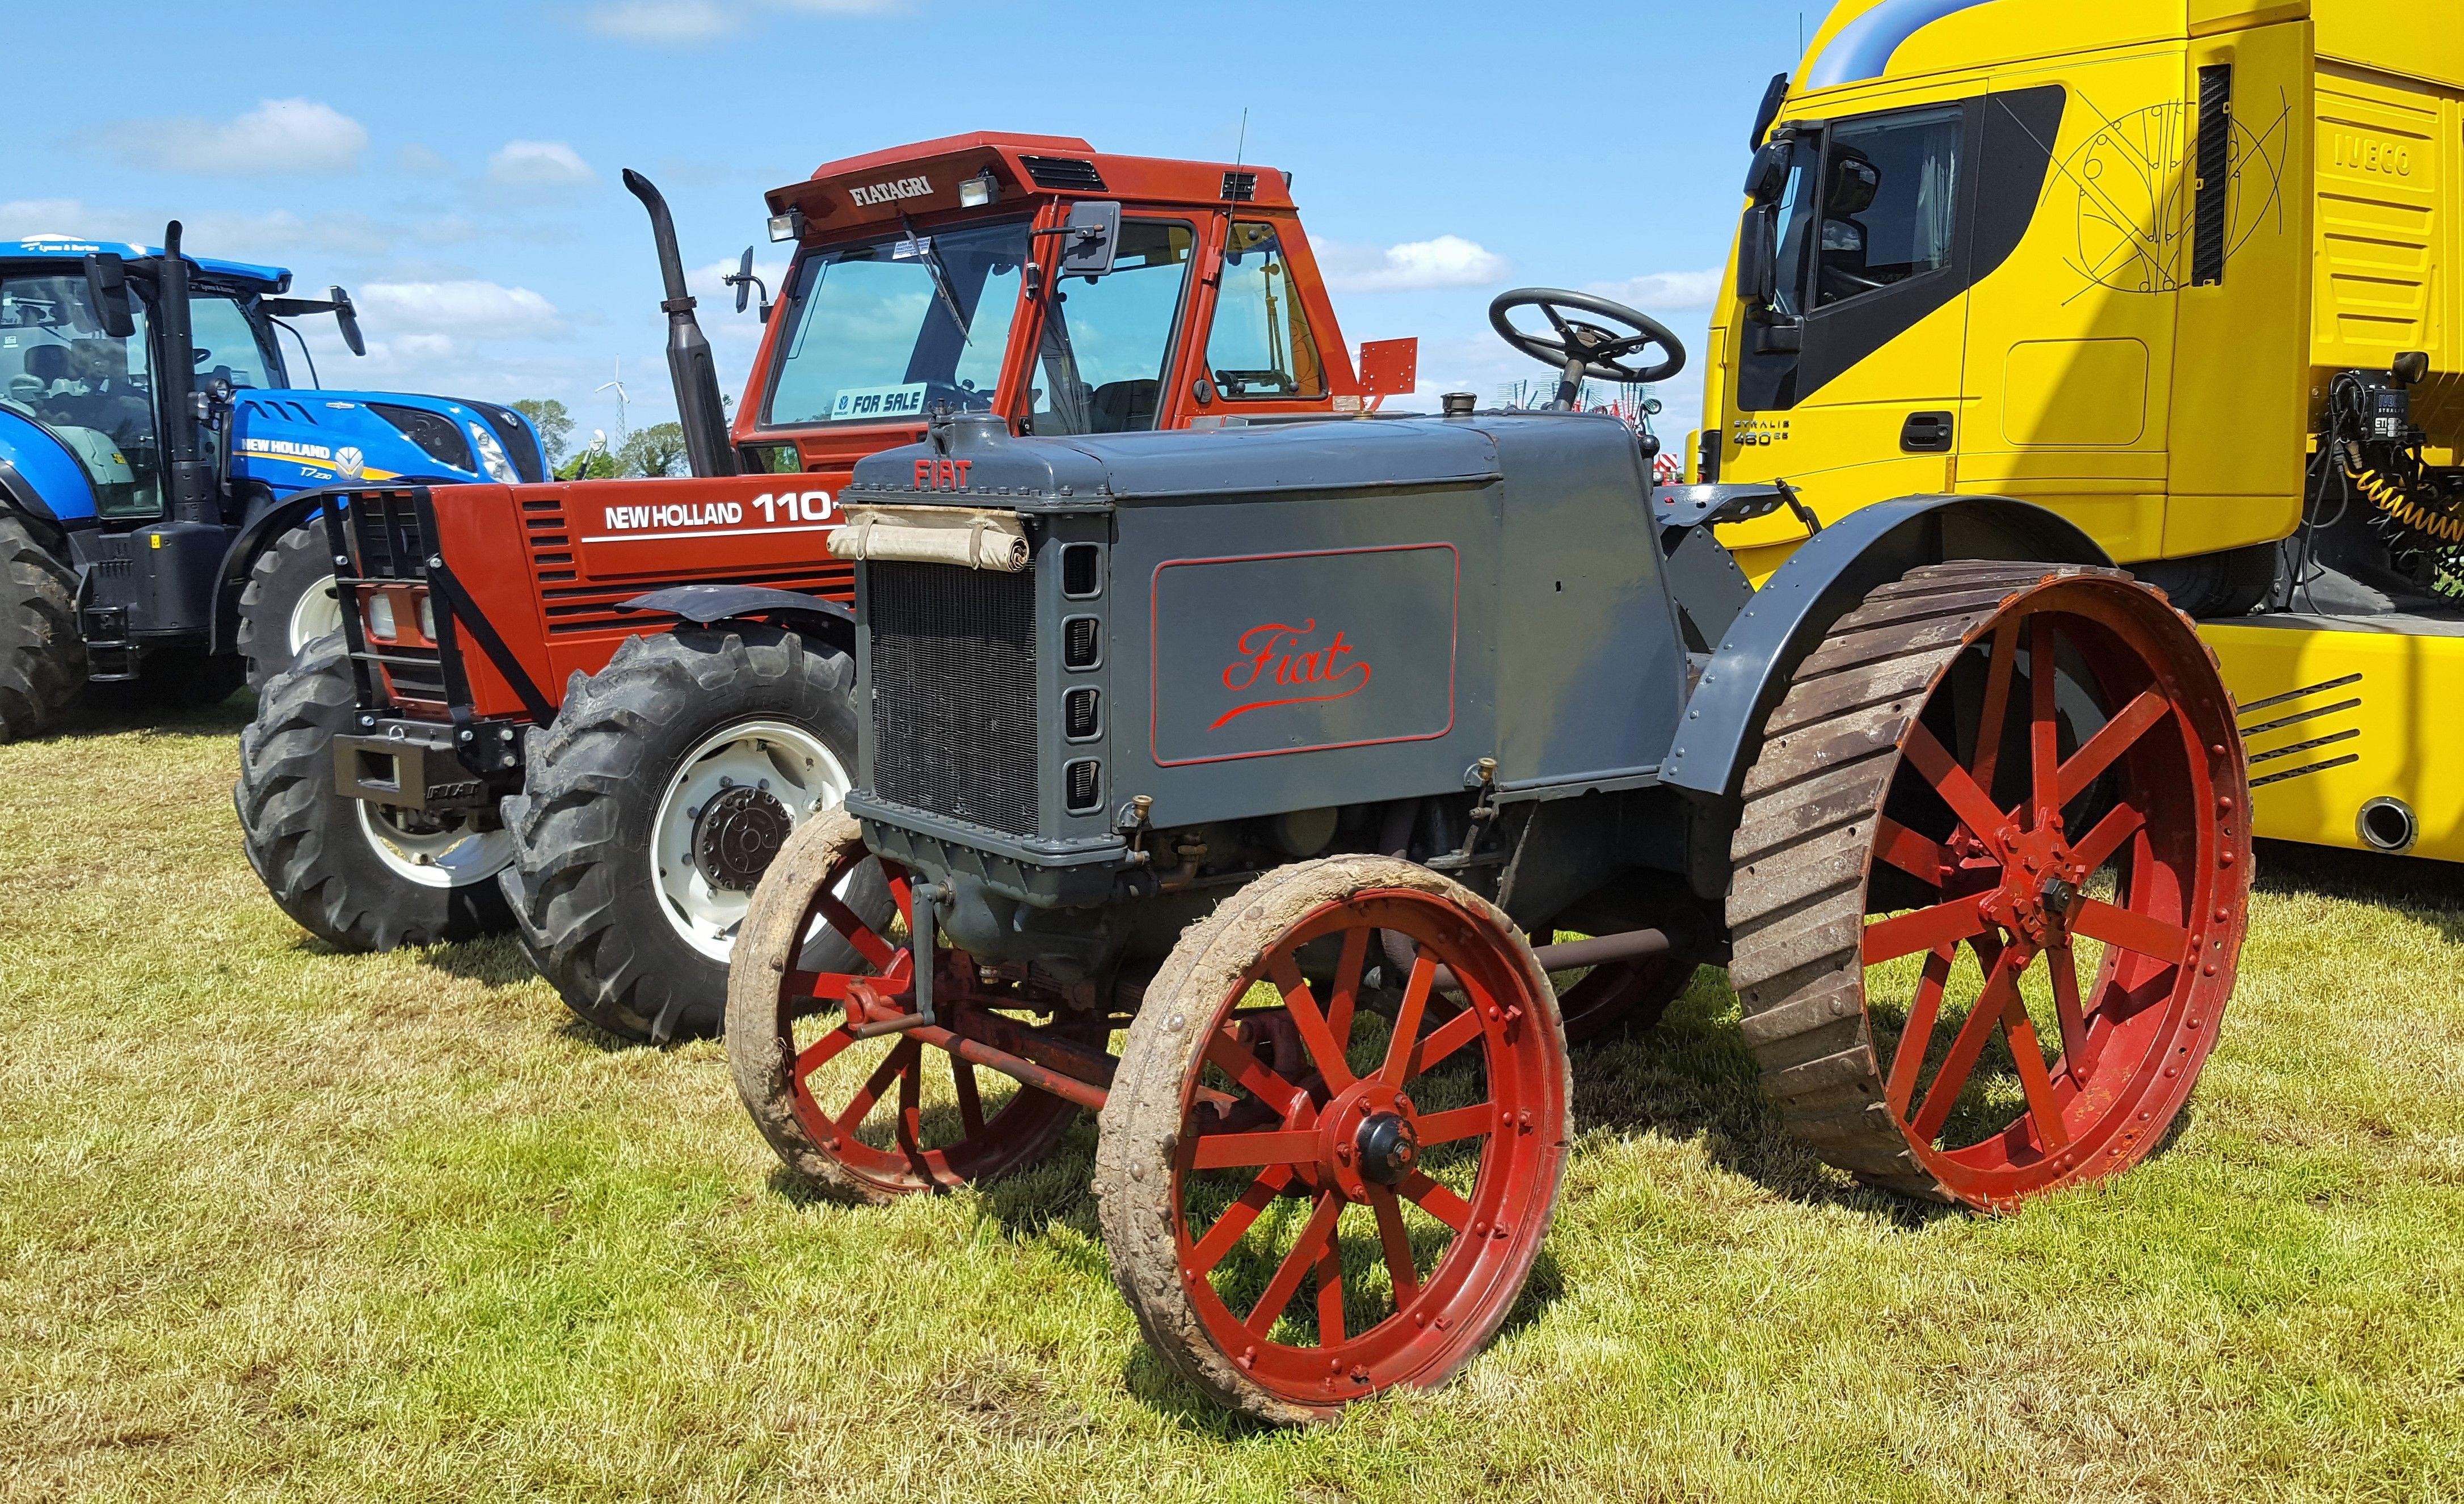 Old New Holland Logo - Old School Outfit Gets An Airing At Grass & Muck